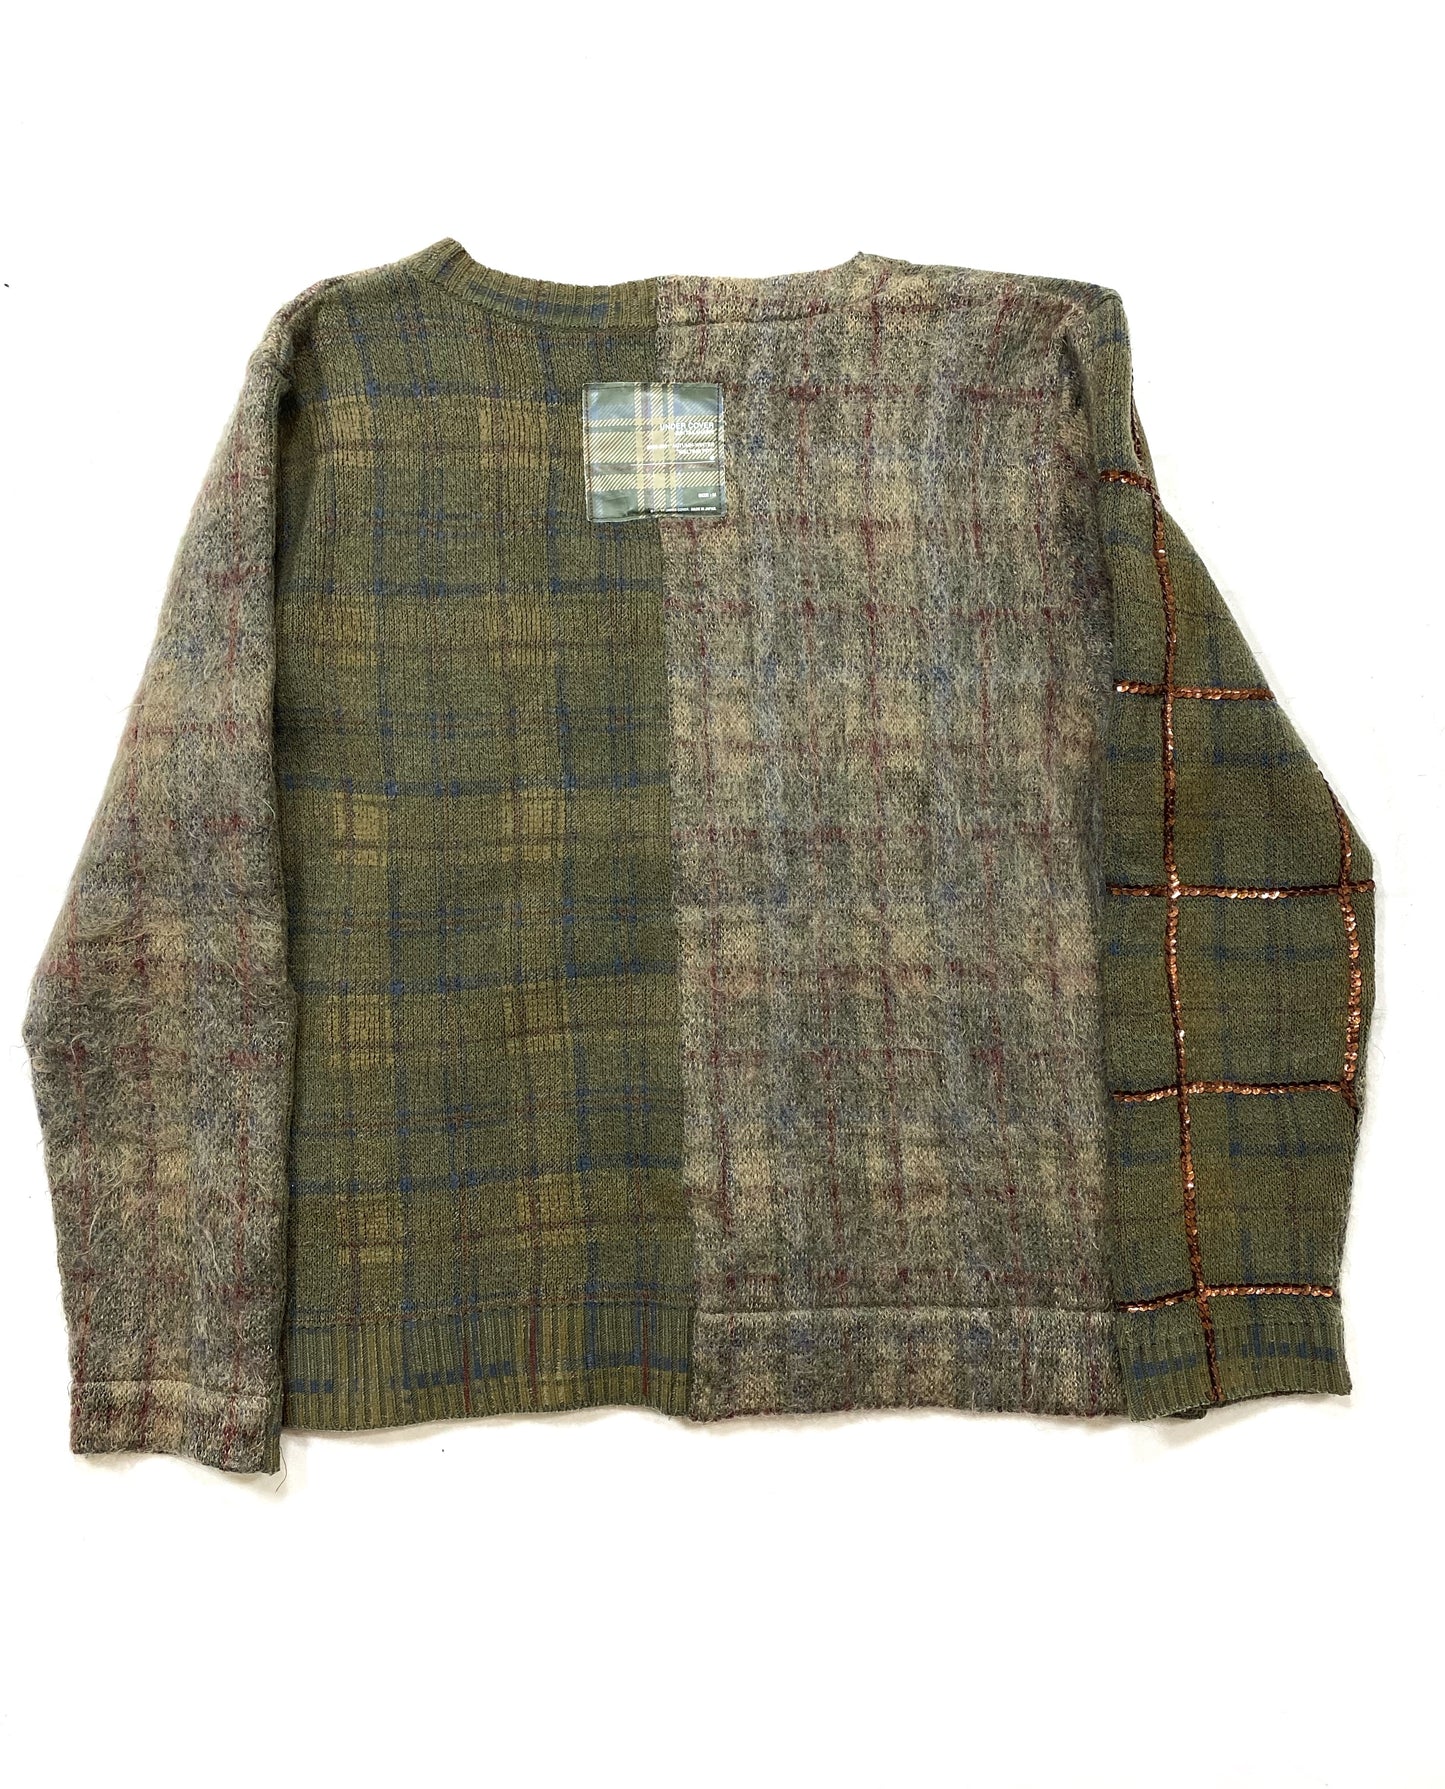 Undercover reconstructed sweater Melting pot A/W00